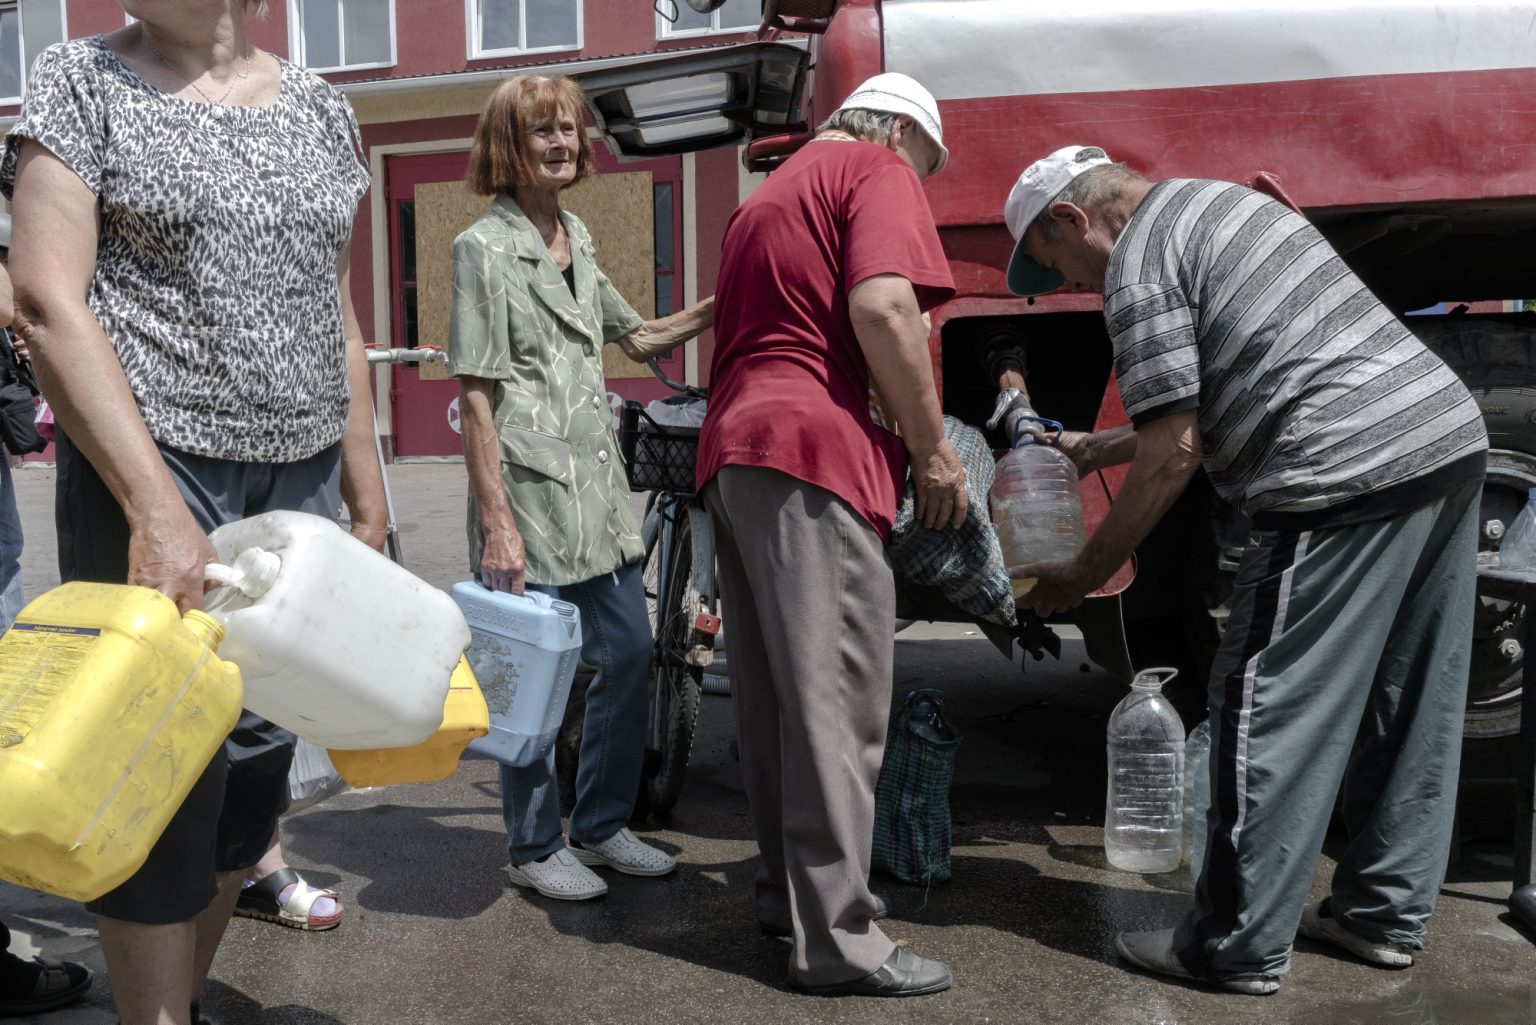 UKRAINE, Lysychansk. June 14, 2022 - People wait in line in the courtyard of the fire station of Lysychansk during water distribution.